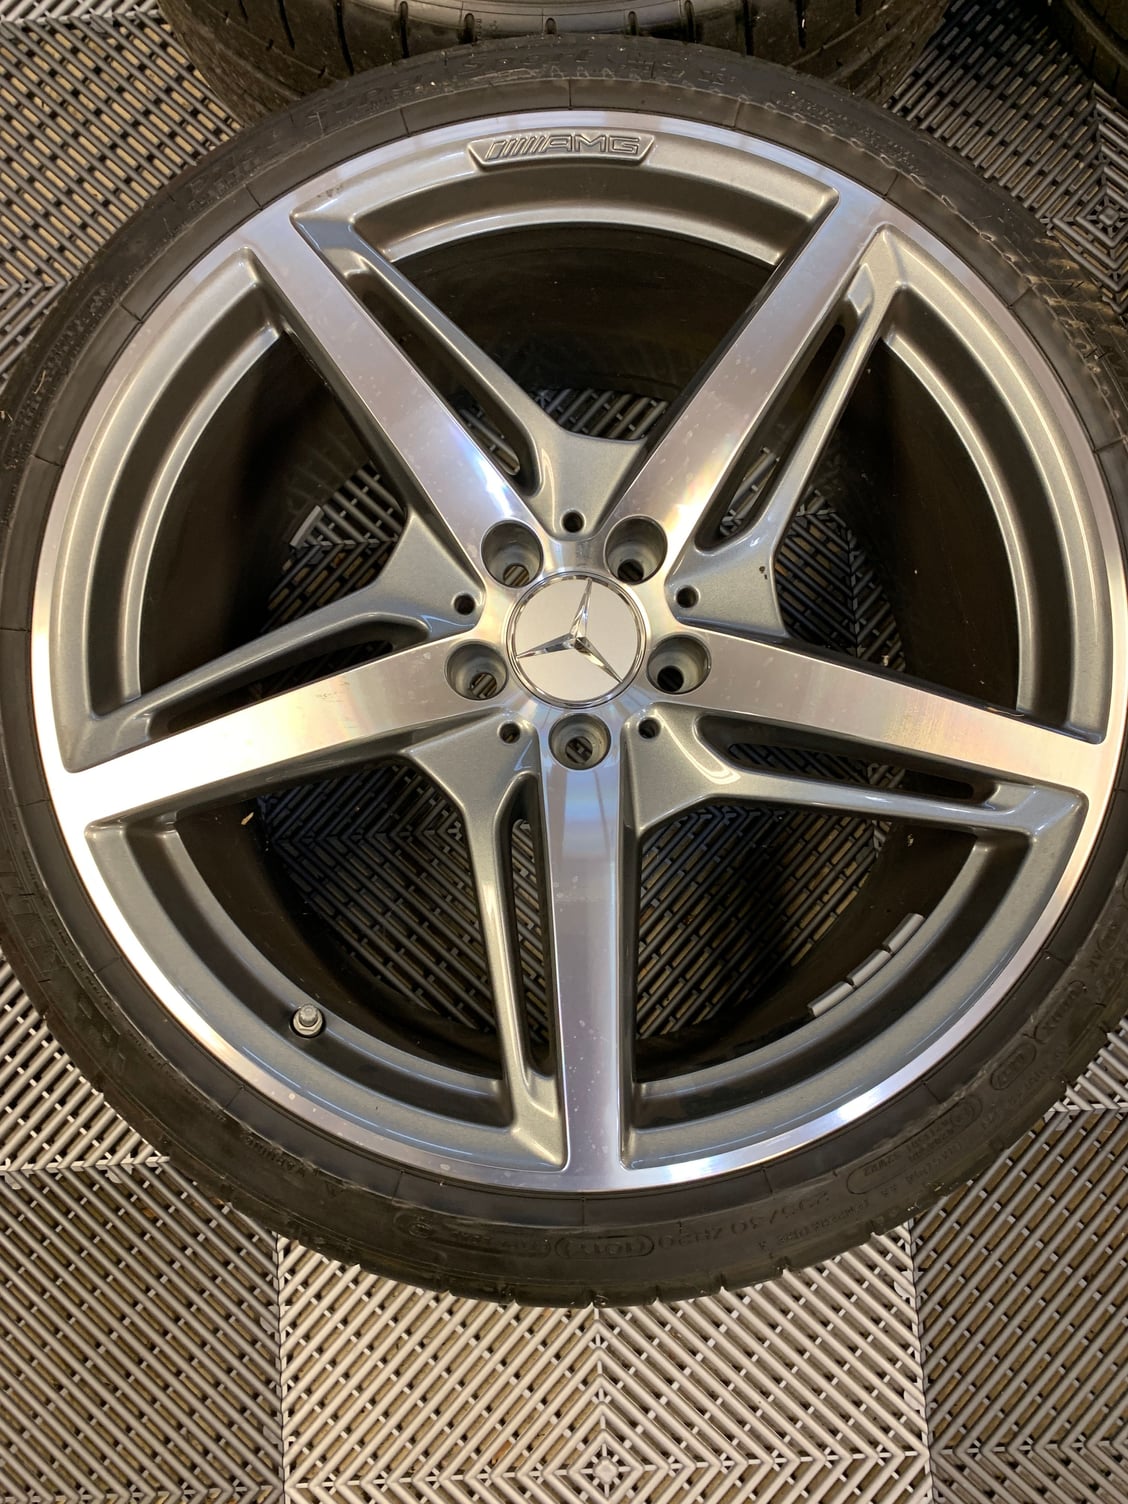 Wheels and Tires/Axles - AMG GT/GTS OEM Split Spoke Wheels and Tires Very Low miles Michelin Super Sport Tires - Used - 2016 to 2019 Mercedes-Benz AMG GT - Mclean, VA 22101, United States